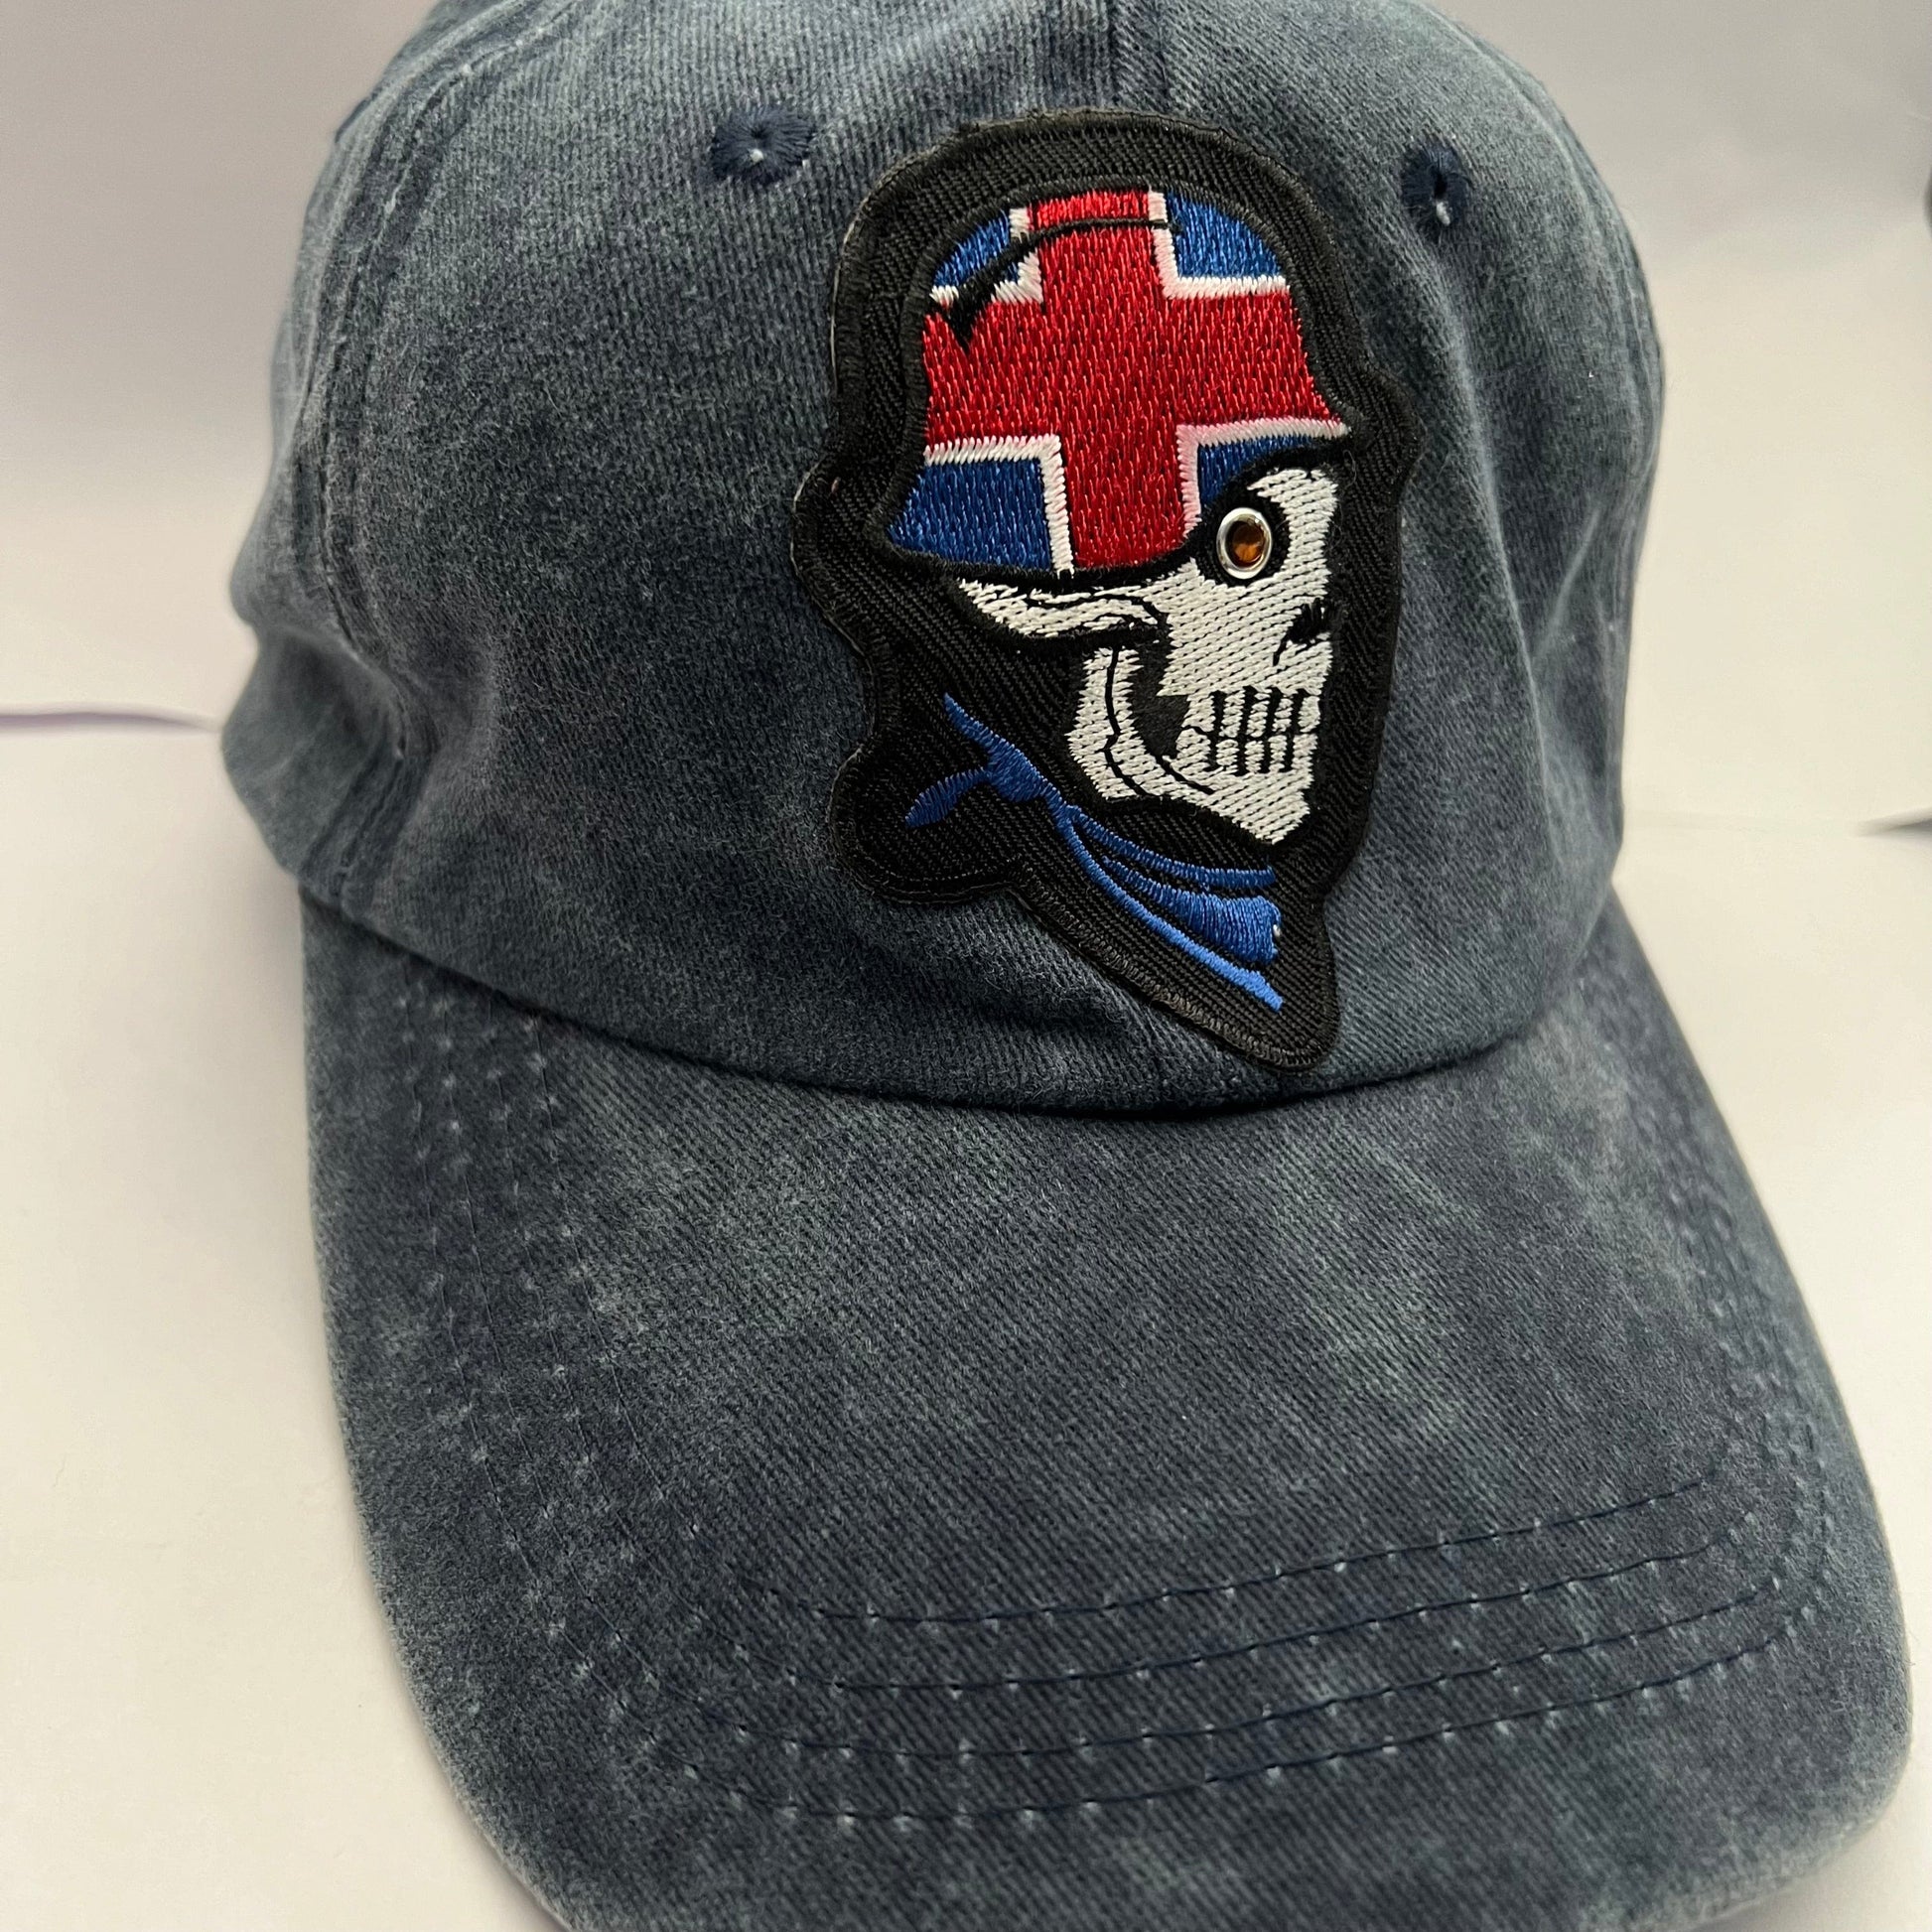 Navy Denim Cap Skull embroidered patch on the hat